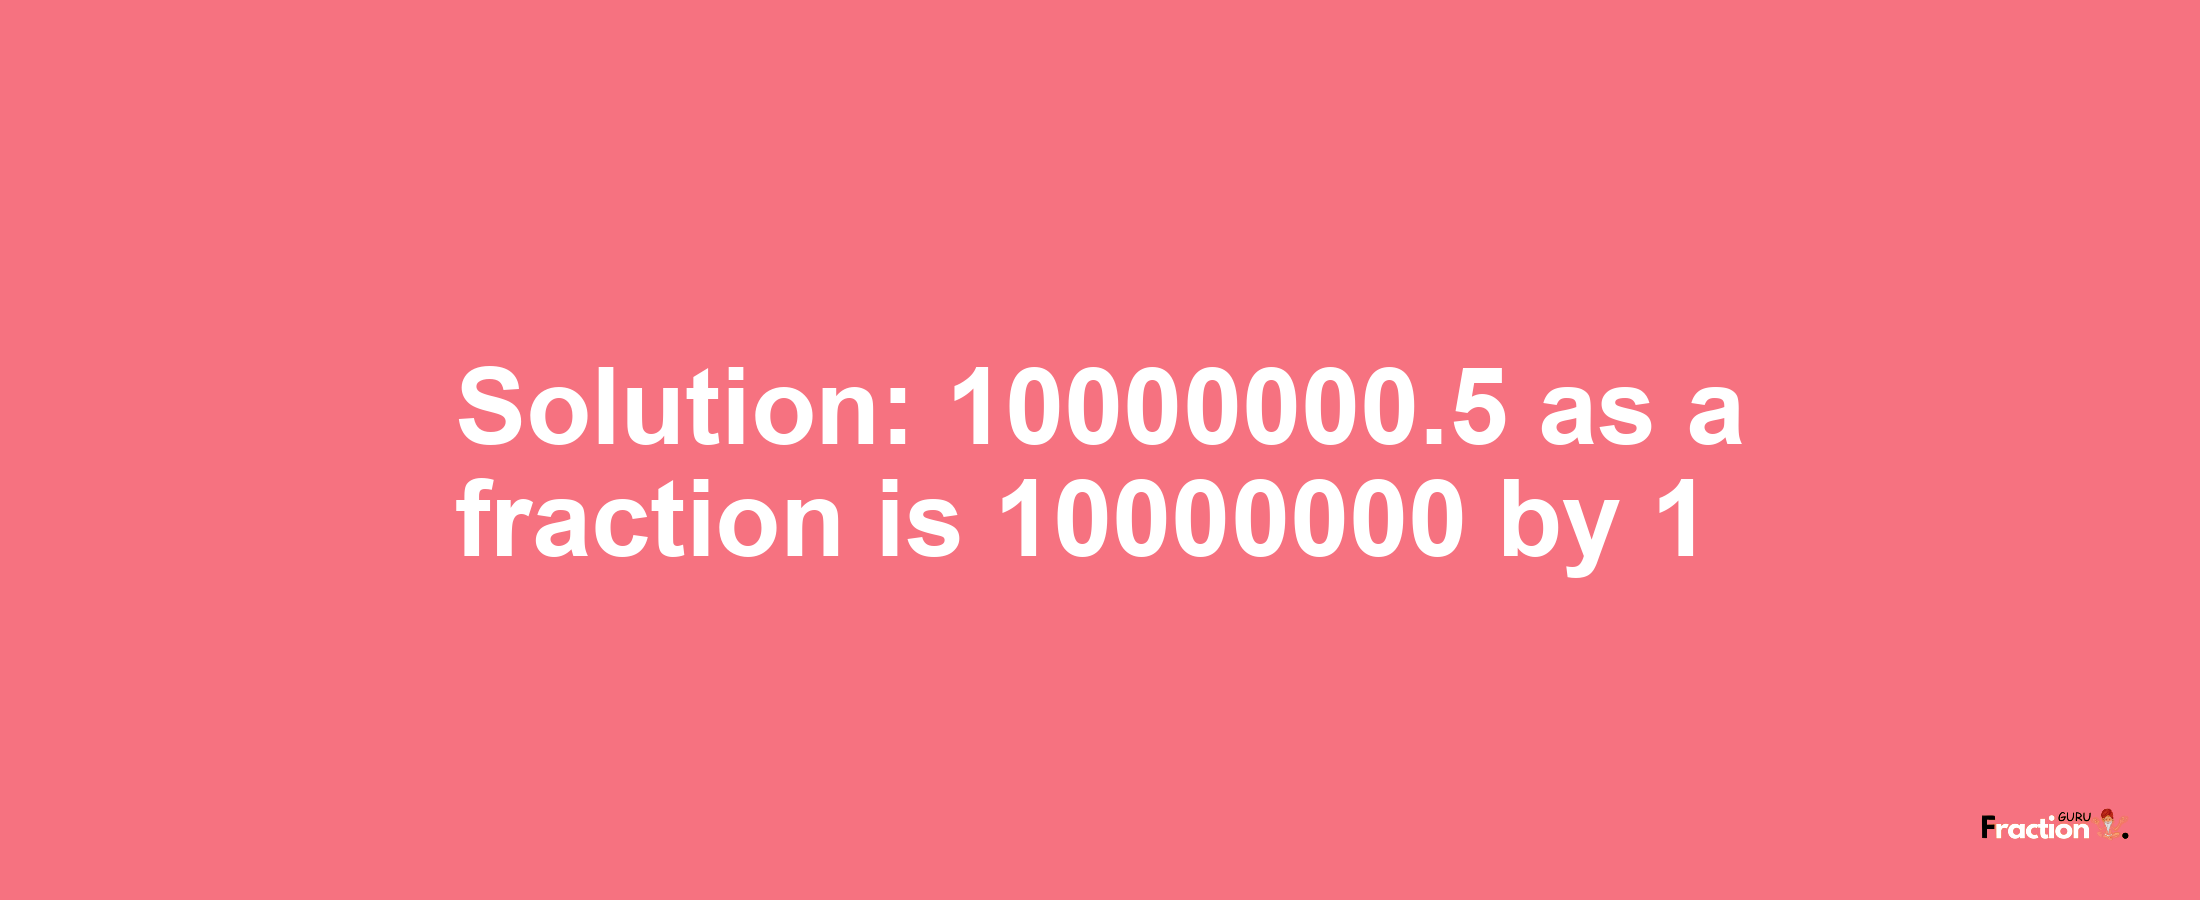 Solution:10000000.5 as a fraction is 10000000/1